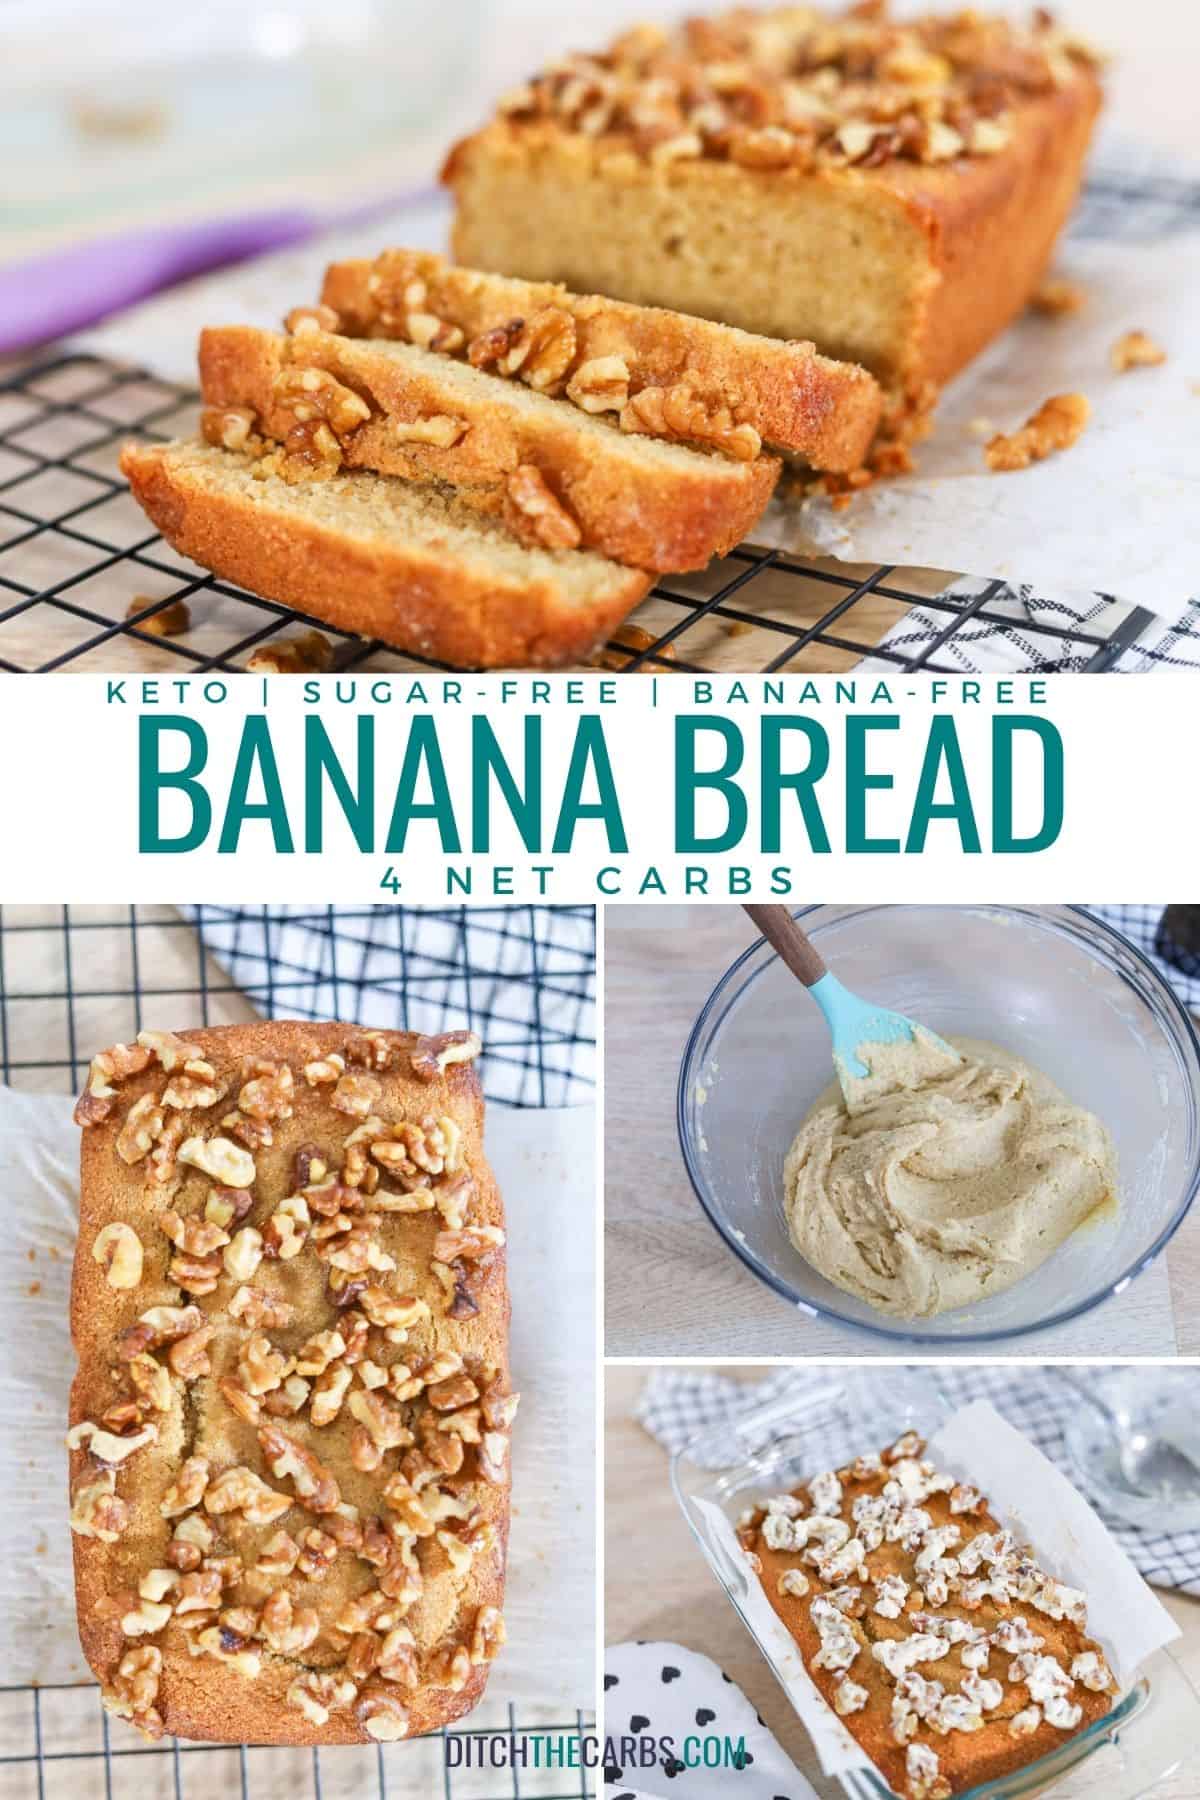 Collage of images showing how to make keto banana bread